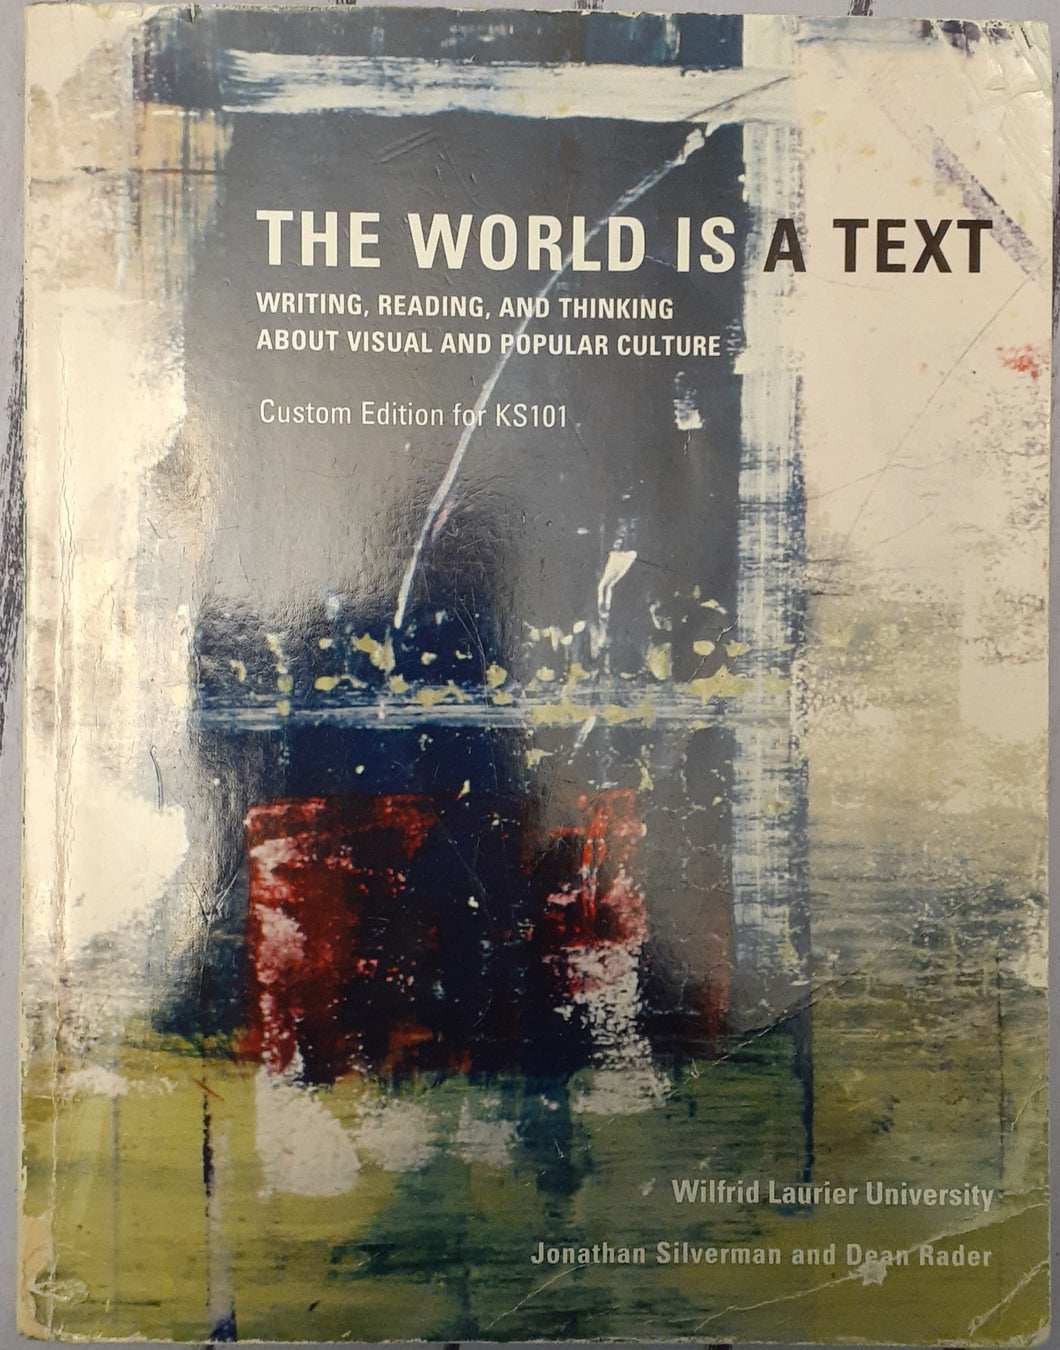 The World is a Text: Writing About Visual and Popular Culture